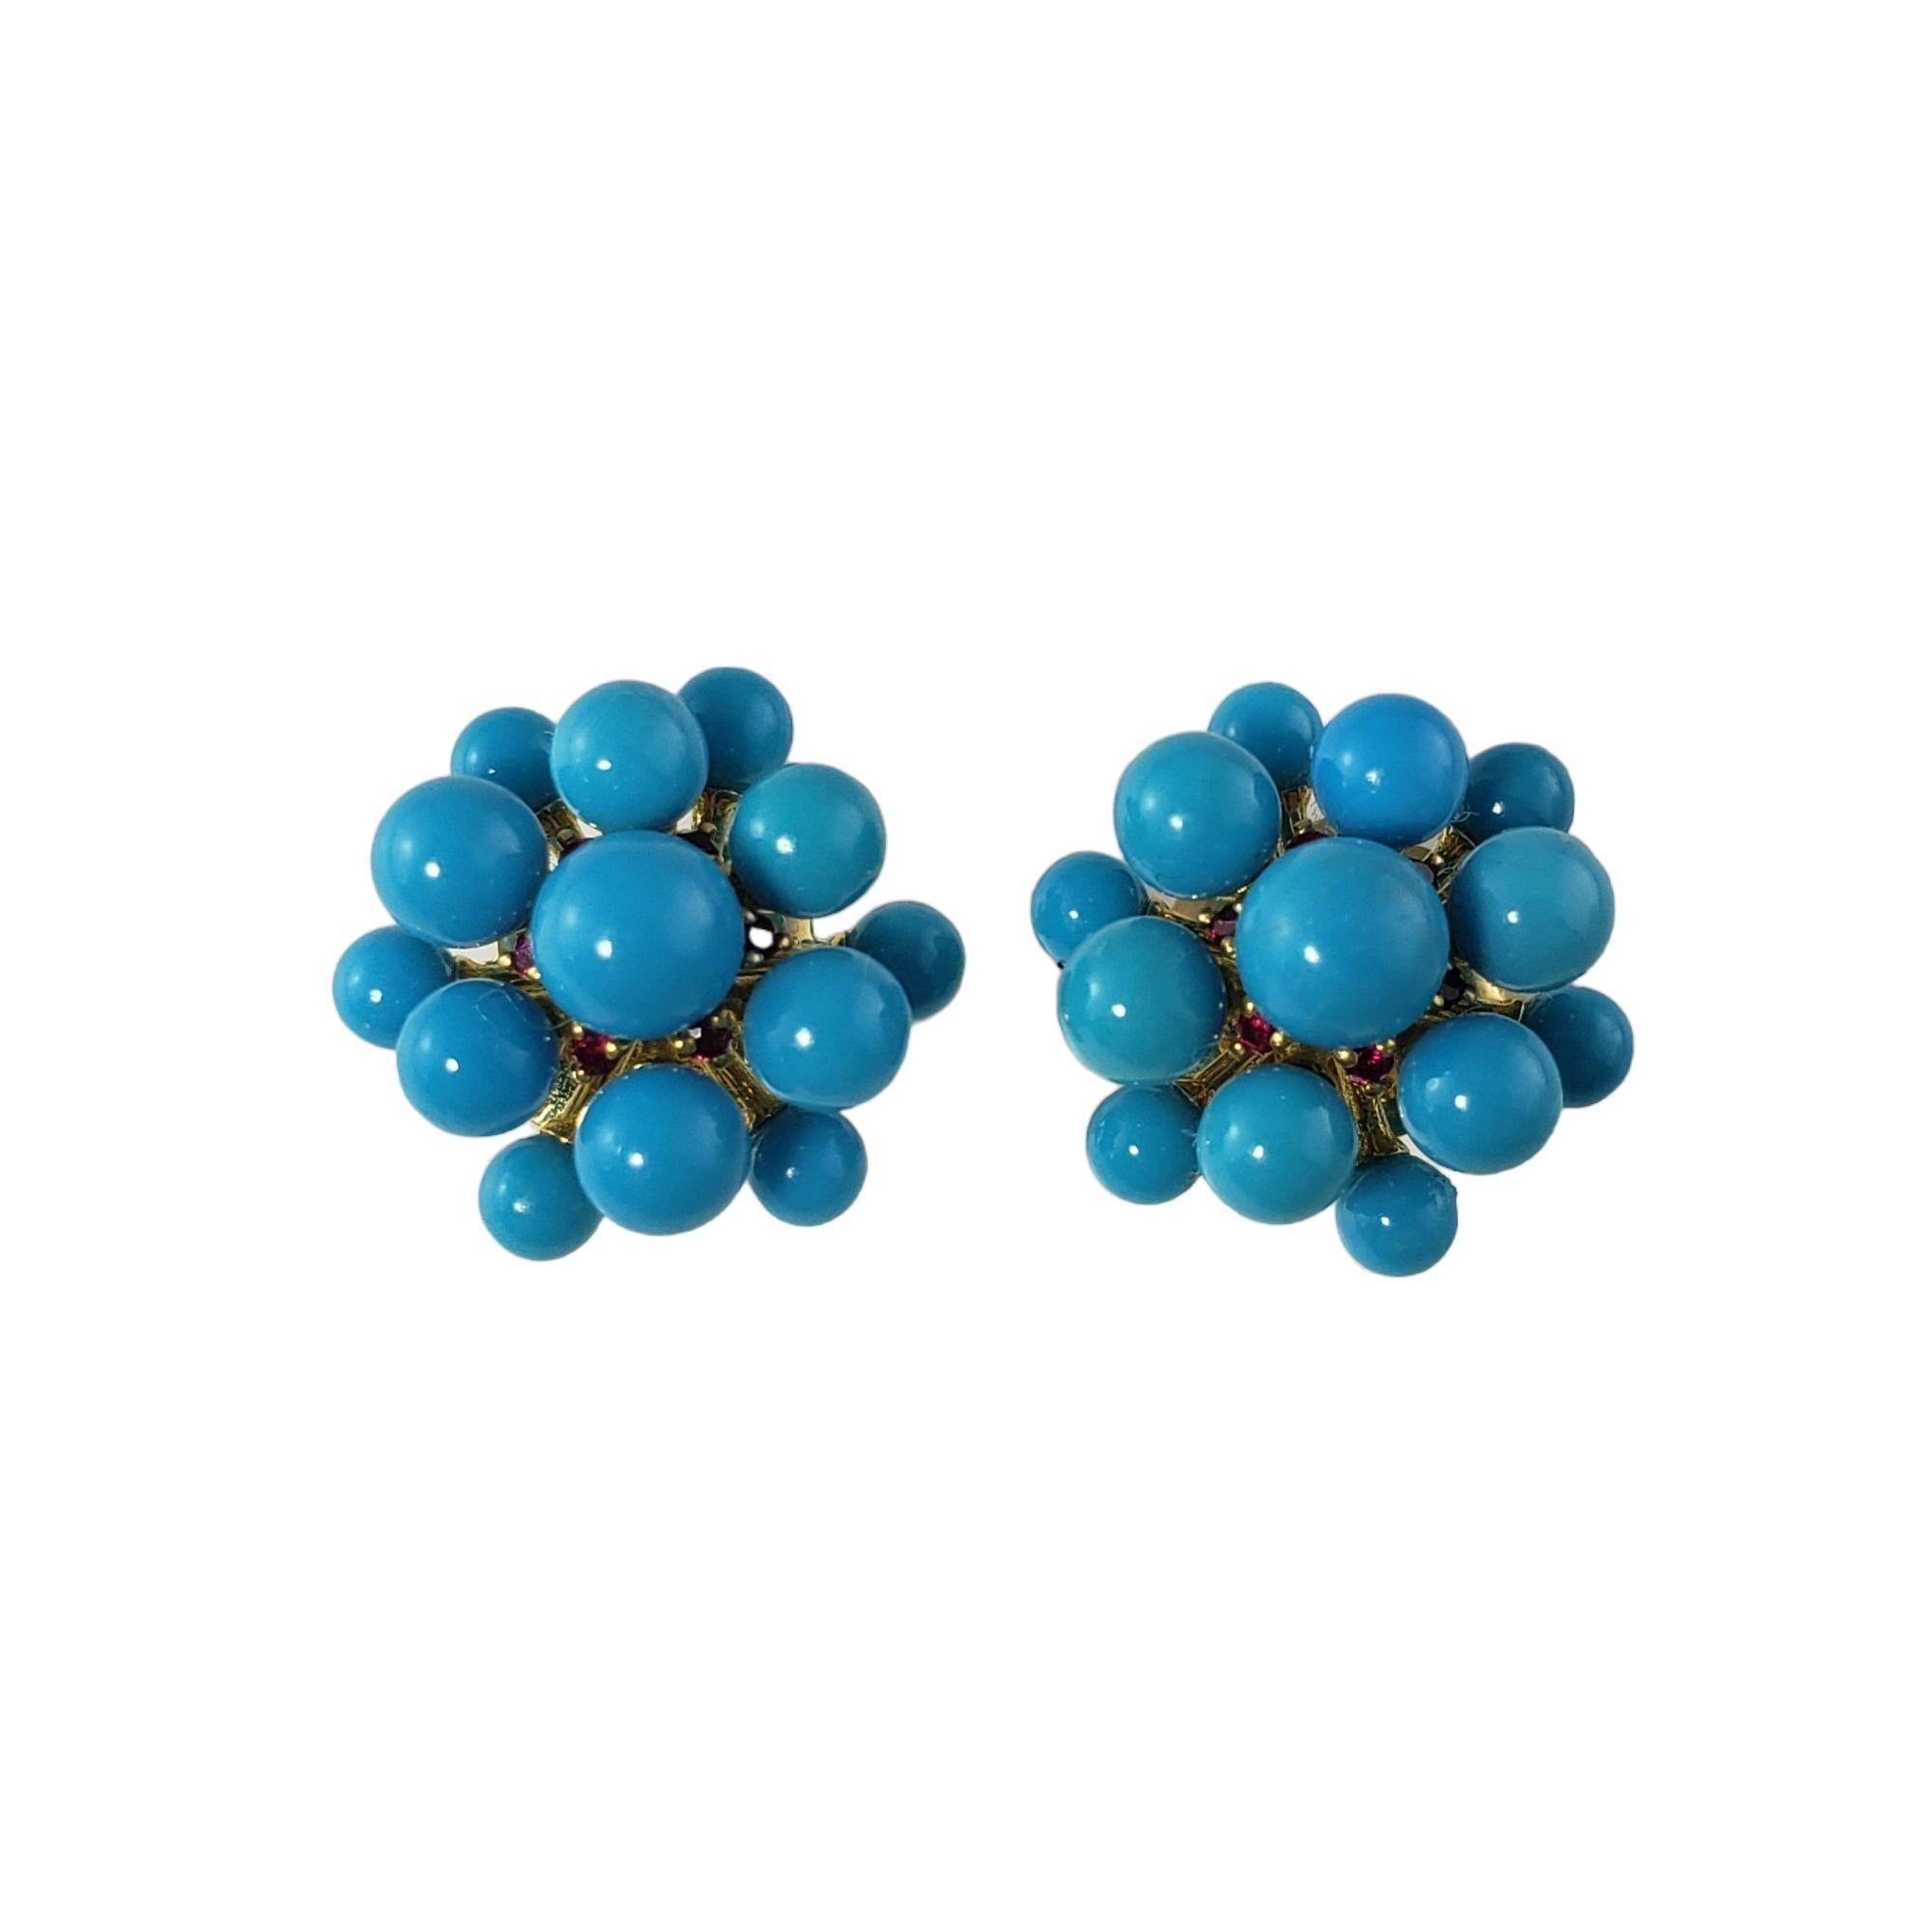 Paul Morelli 18 Karat Yellow Gold Turquoise and Ruby Orbit Cluster Earrings-

These lovely Paul Morelli earrings are decorated with turquoise and ruby gemstones set in classic 18K yellow gold.  Push back closures.

Total turquoise weight:  10.48